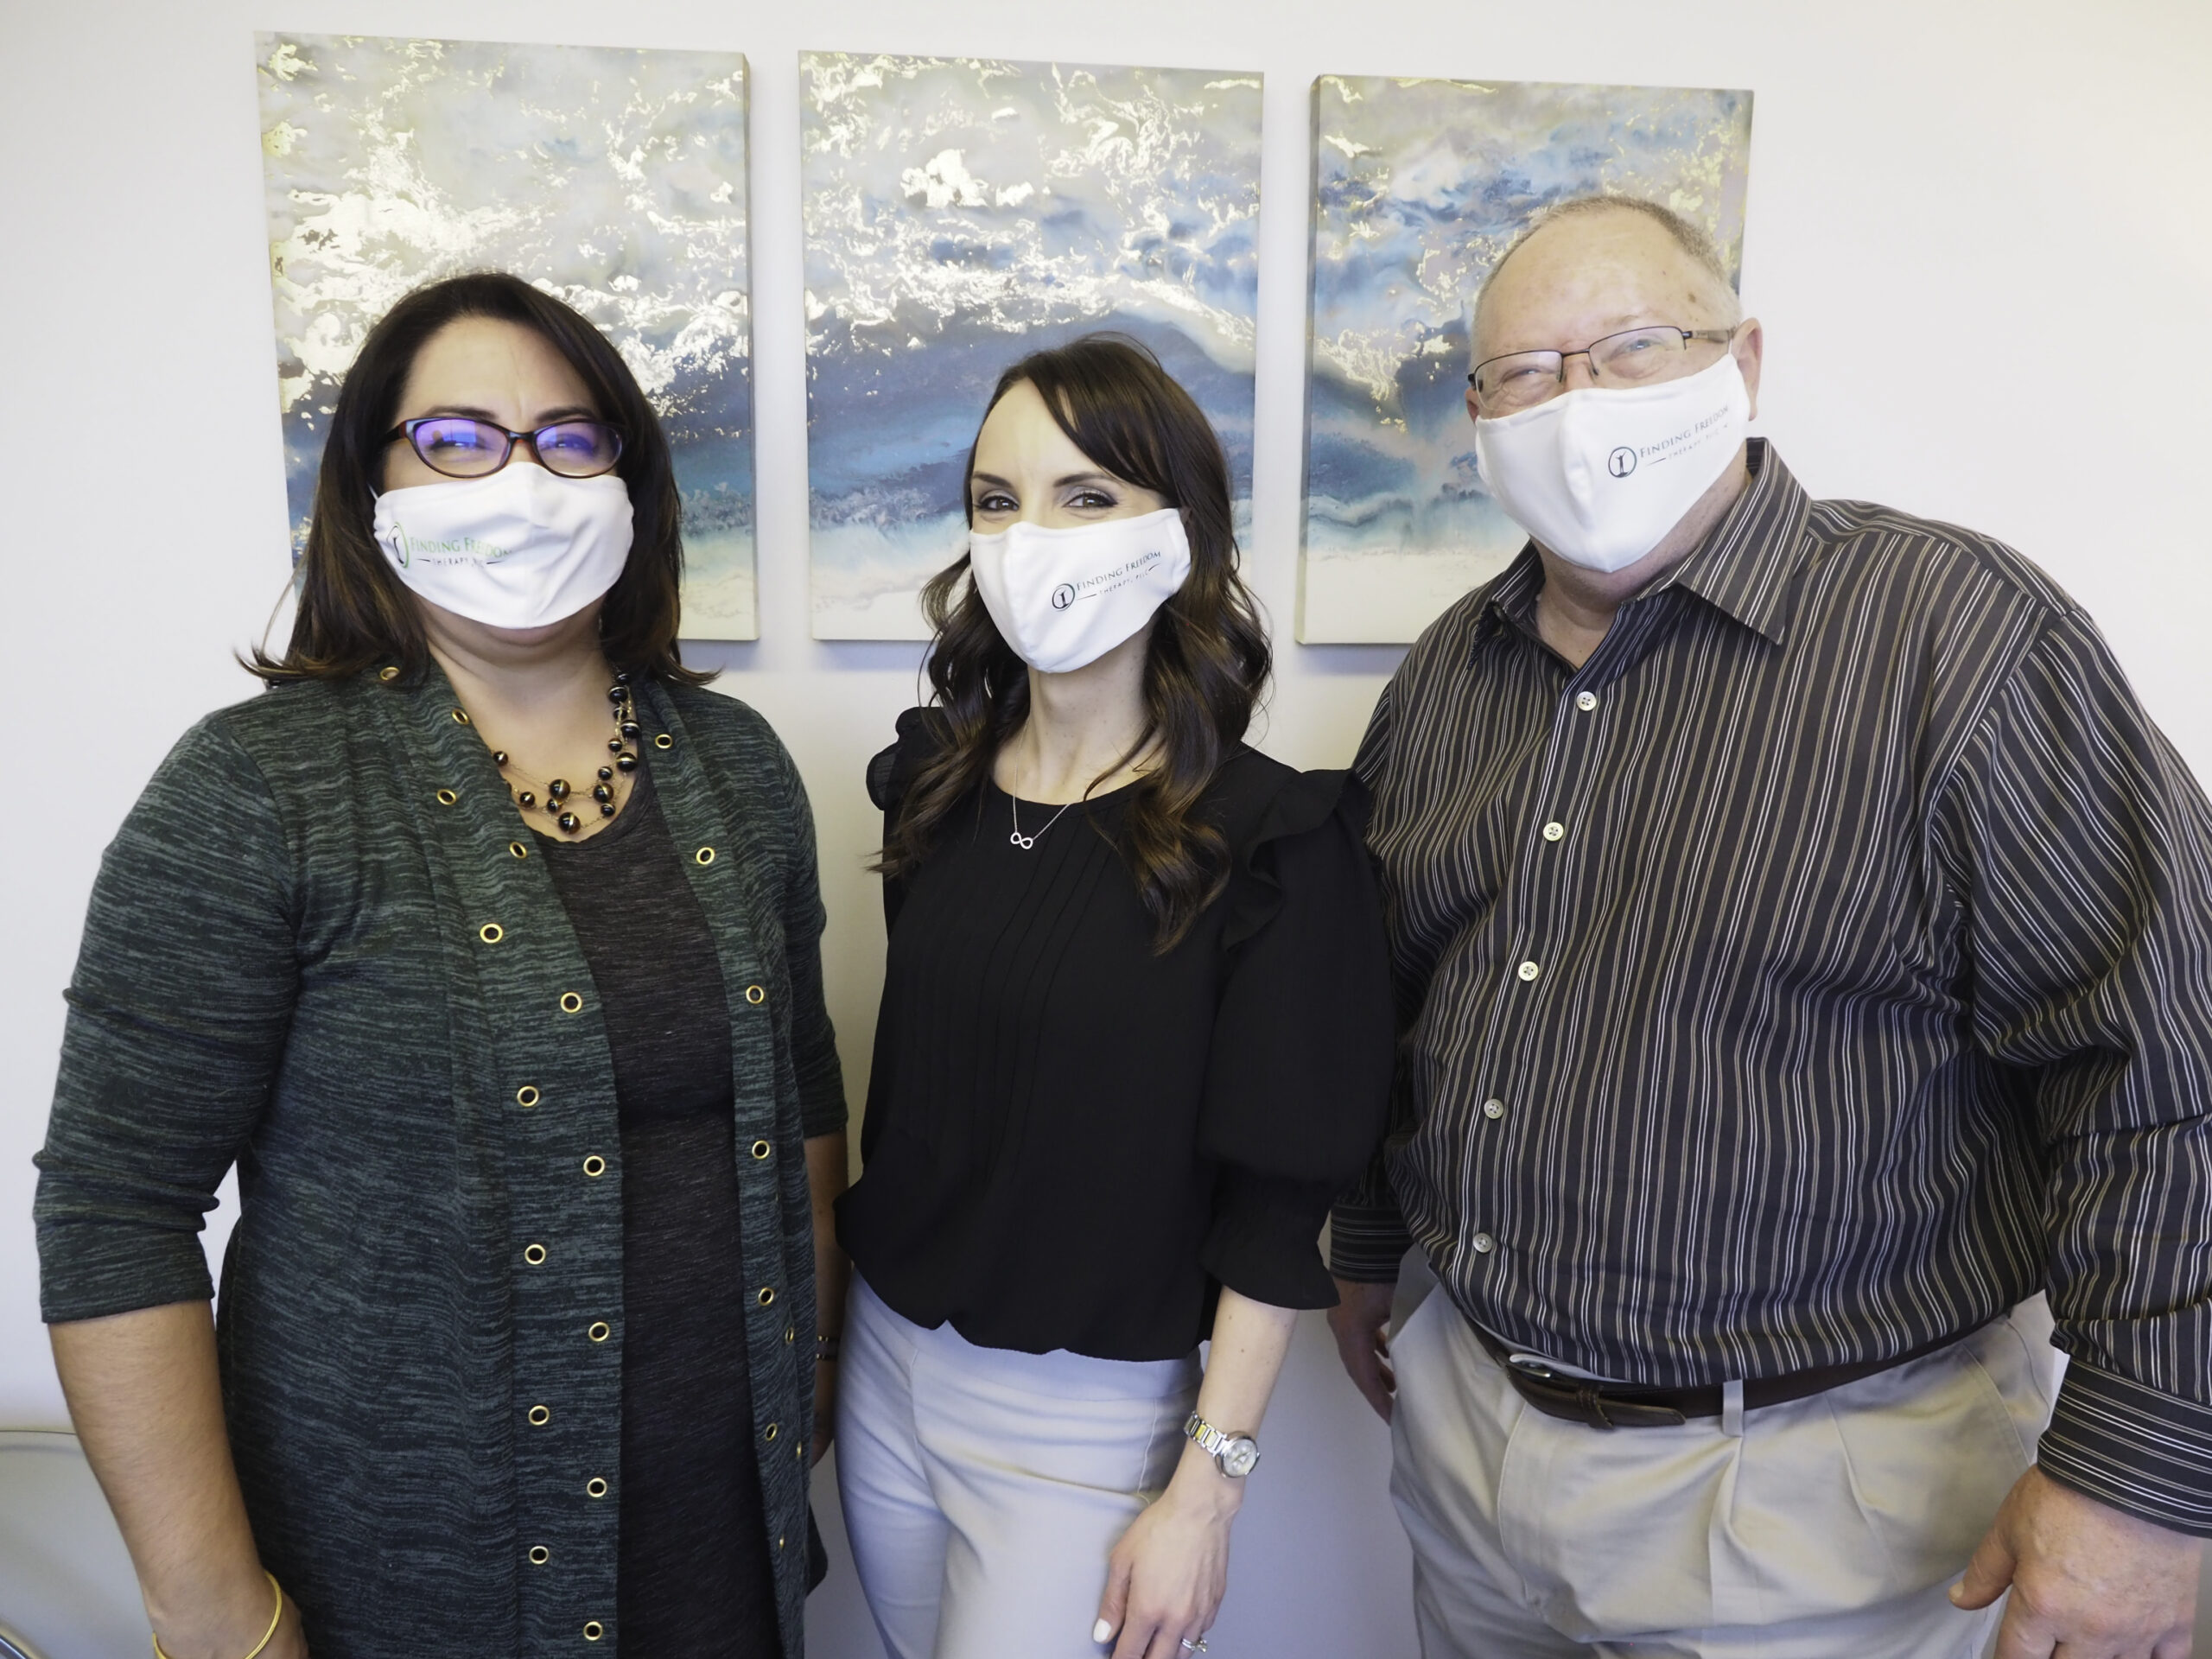 Finding Freedom Therapy team wearing masks